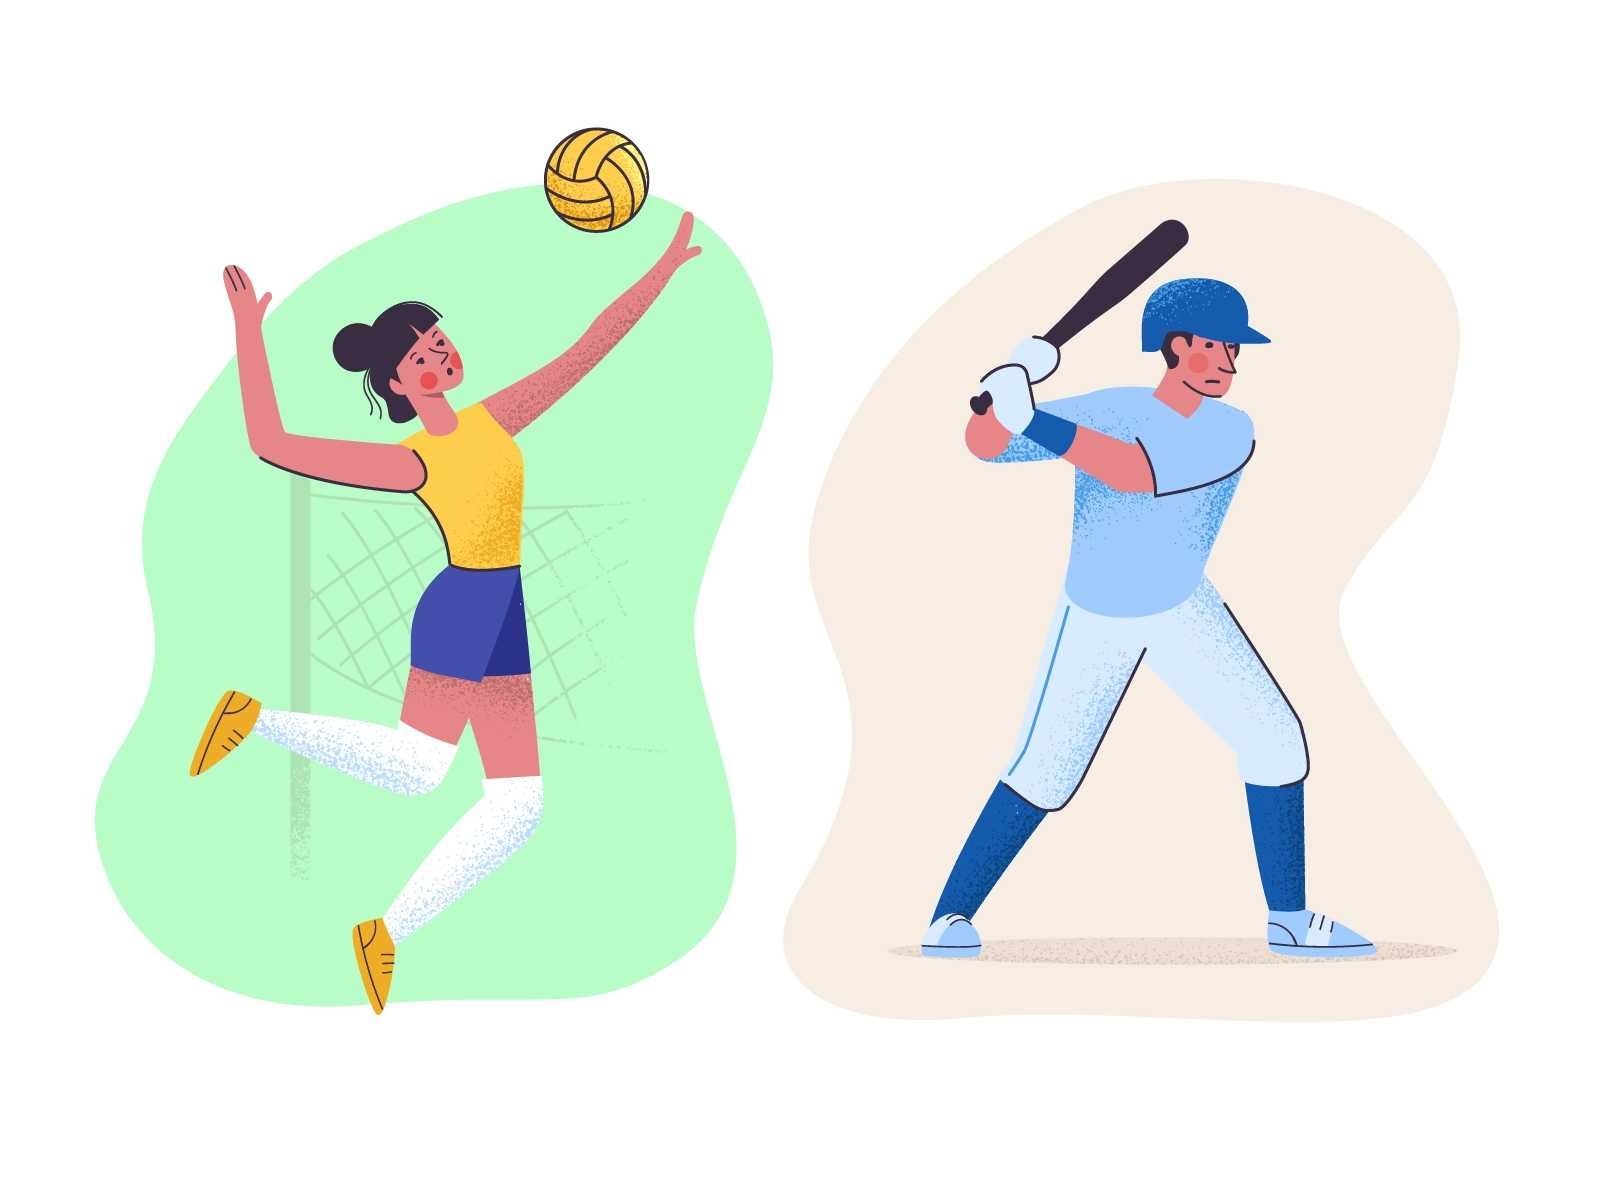 In your own pitch deck, instead of downplaying your competitors, focus on showing your difference (*image by [Alex Chizh](https://dribbble.com/chizhikoff){ rel="nofollow" target="_blank" .default-md}*)